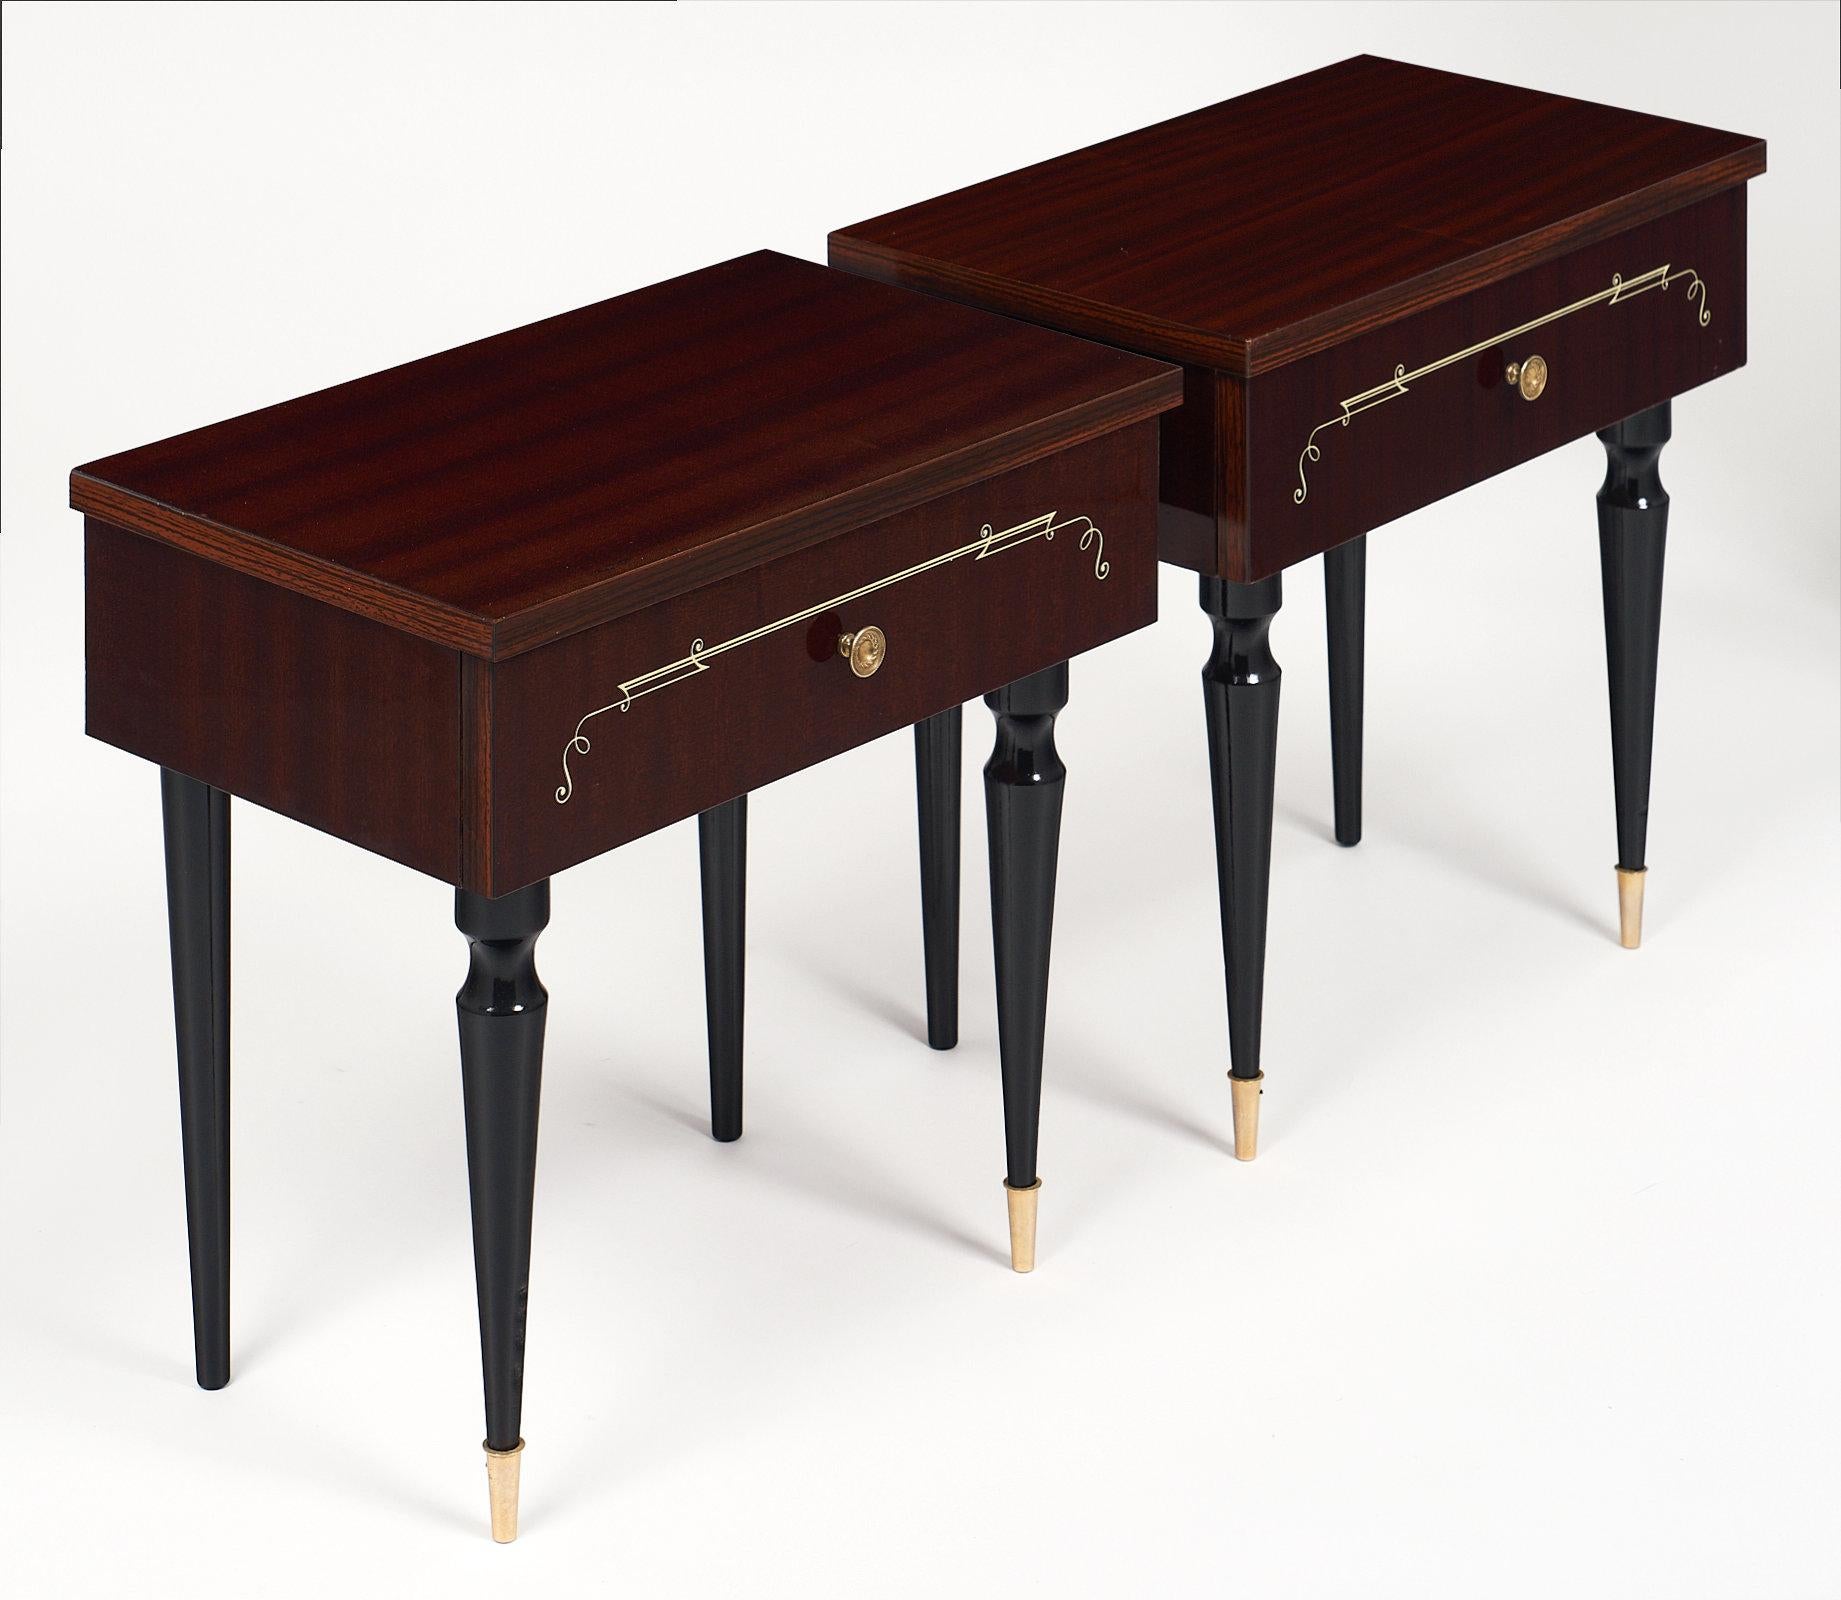 Elegant French Art Deco side tables made of mahogany, each with one drawer and a brass knob. This mod pair has ebonized, tapered legs with brass feet. Each drawer has lovely inlays across the facade as well.